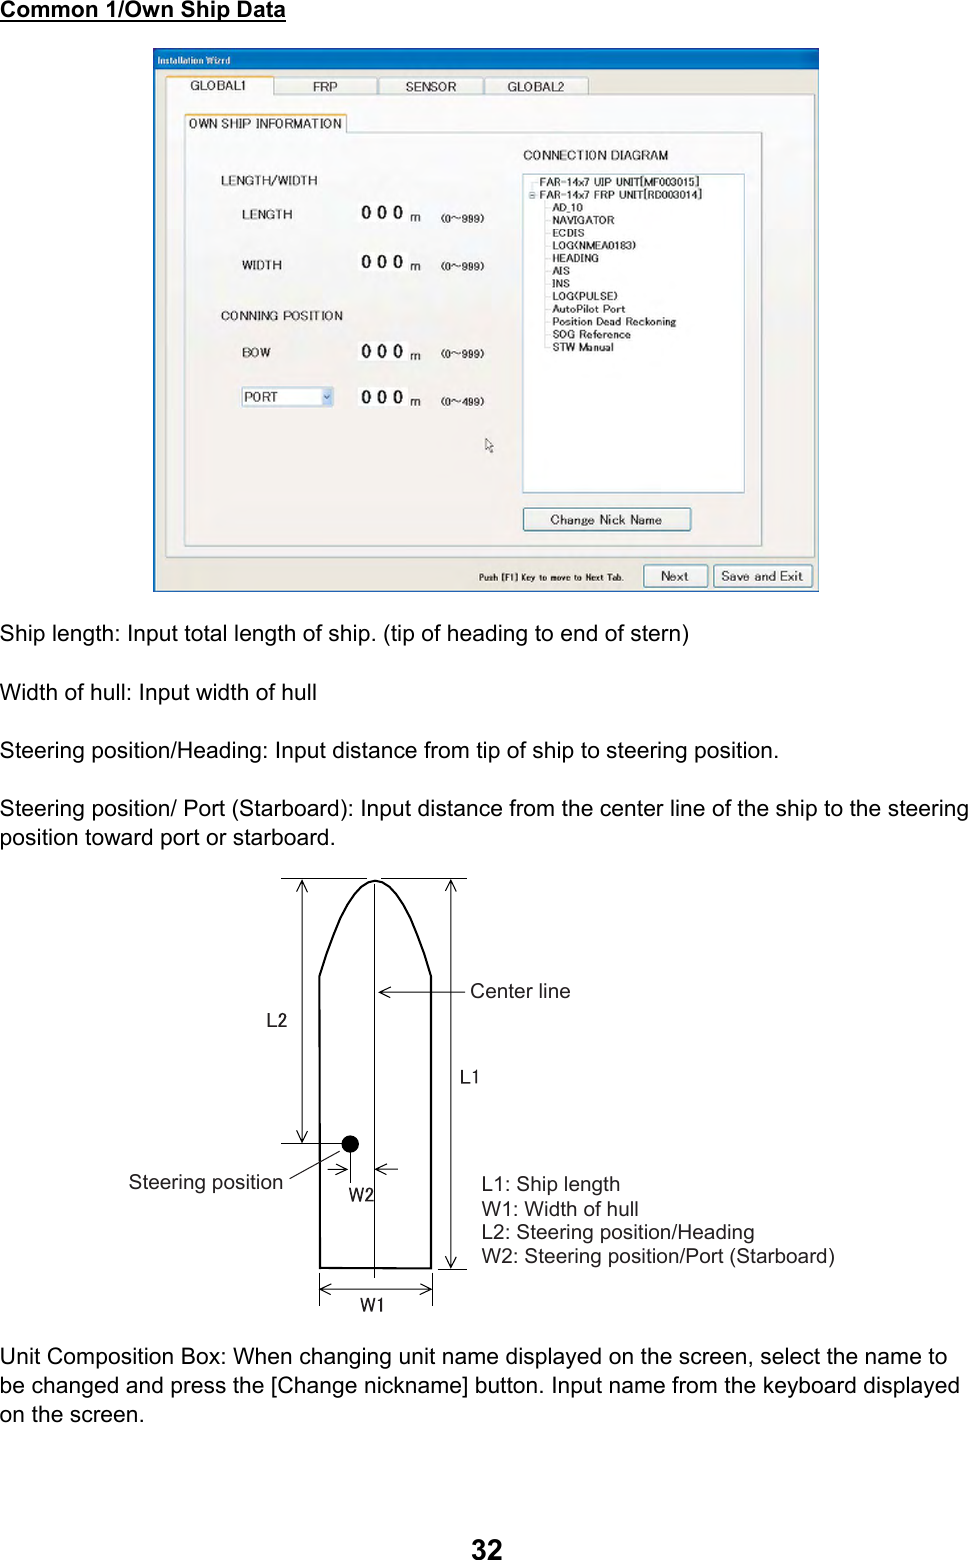  32Common 1/Own Ship Data  Ship length: Input total length of ship. (tip of heading to end of stern)  Width of hull: Input width of hull  Steering position/Heading: Input distance from tip of ship to steering position.  Steering position/ Port (Starboard): Input distance from the center line of the ship to the steering position toward port or starboard. Center lineSteering position L1: Ship length W1: Width of hullL2: Steering position/HeadingW2: Steering position/Port (Starboard) Unit Composition Box: When changing unit name displayed on the screen, select the name to be changed and press the [Change nickname] button. Input name from the keyboard displayed on the screen. 